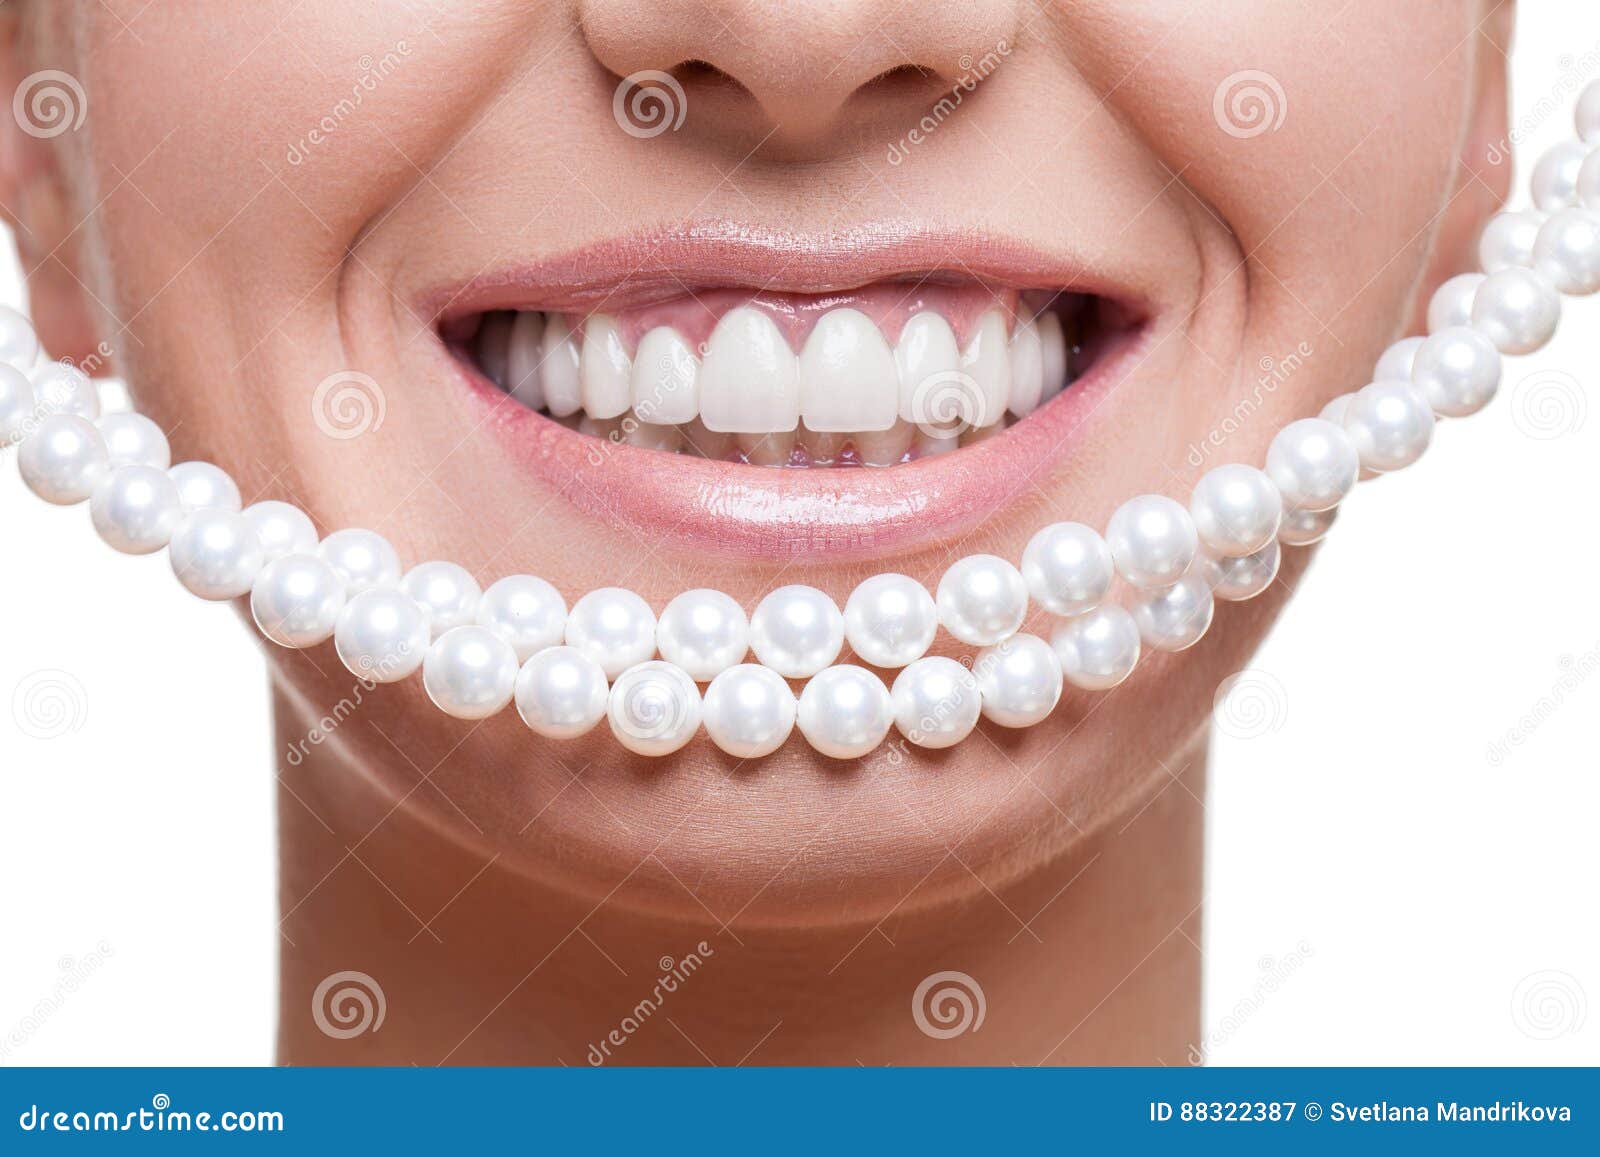 Indian Baby Girl Jewelry Smiling Face Stock Photo 523256218 | Shutterstock